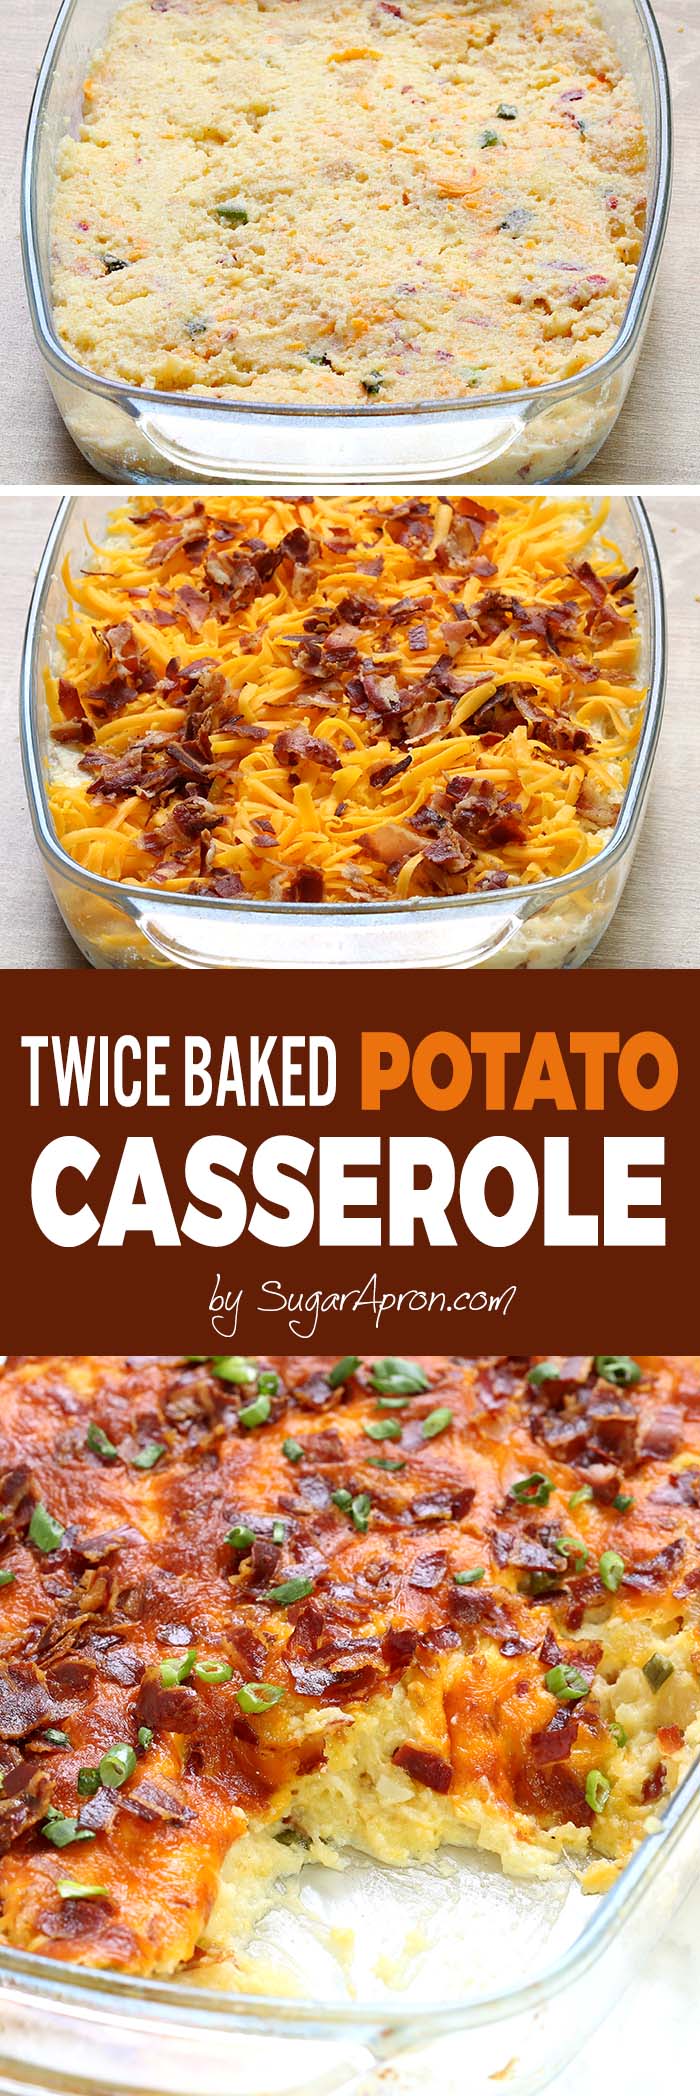 If you've been looking for the ultimate comfort food, look no further, because Twice Baked Potato Casserole has delivered the perfect combination of flavor and warmth. Just imagine your favorite potatoes being crisp, greasy, cheesy, and bacony.